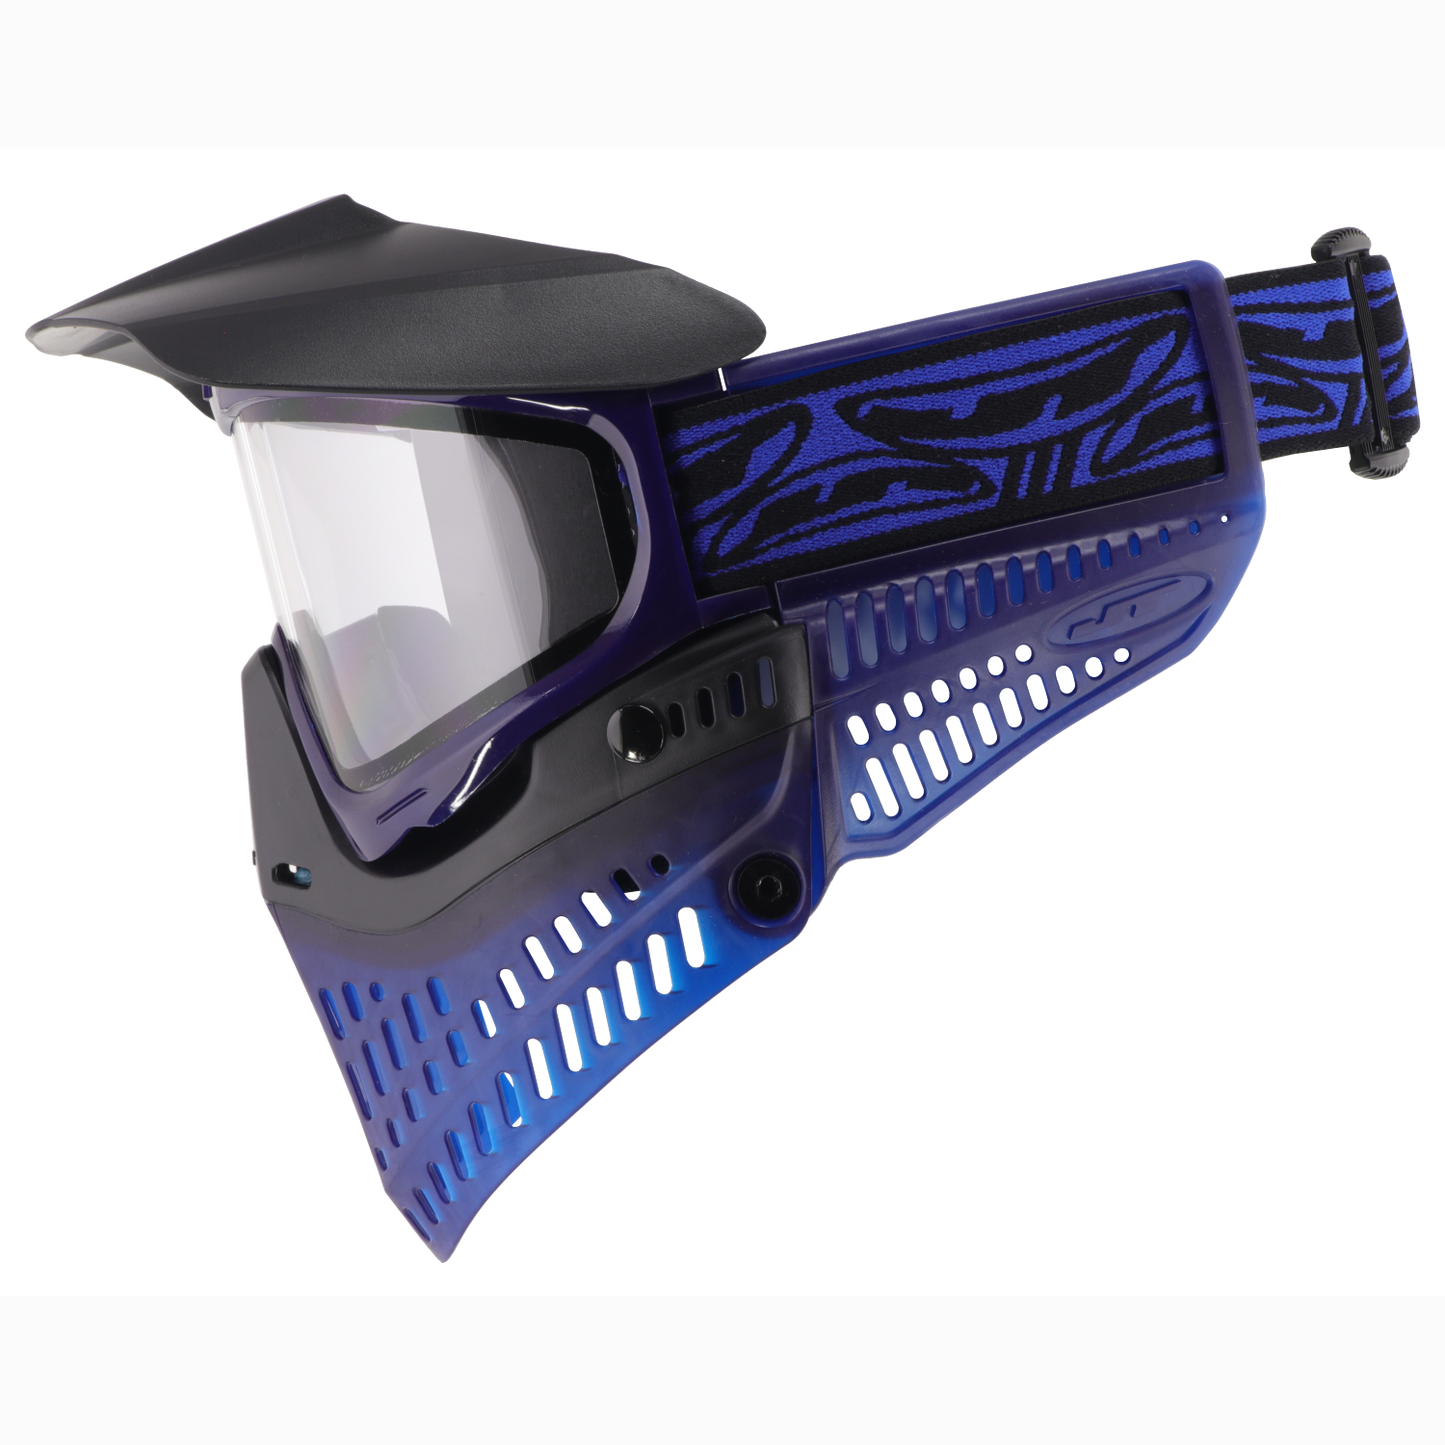 JT Paintball Spectra Proflex Goggle - Ice Series Blue Limited Edition - with lens [Thermal Clear]